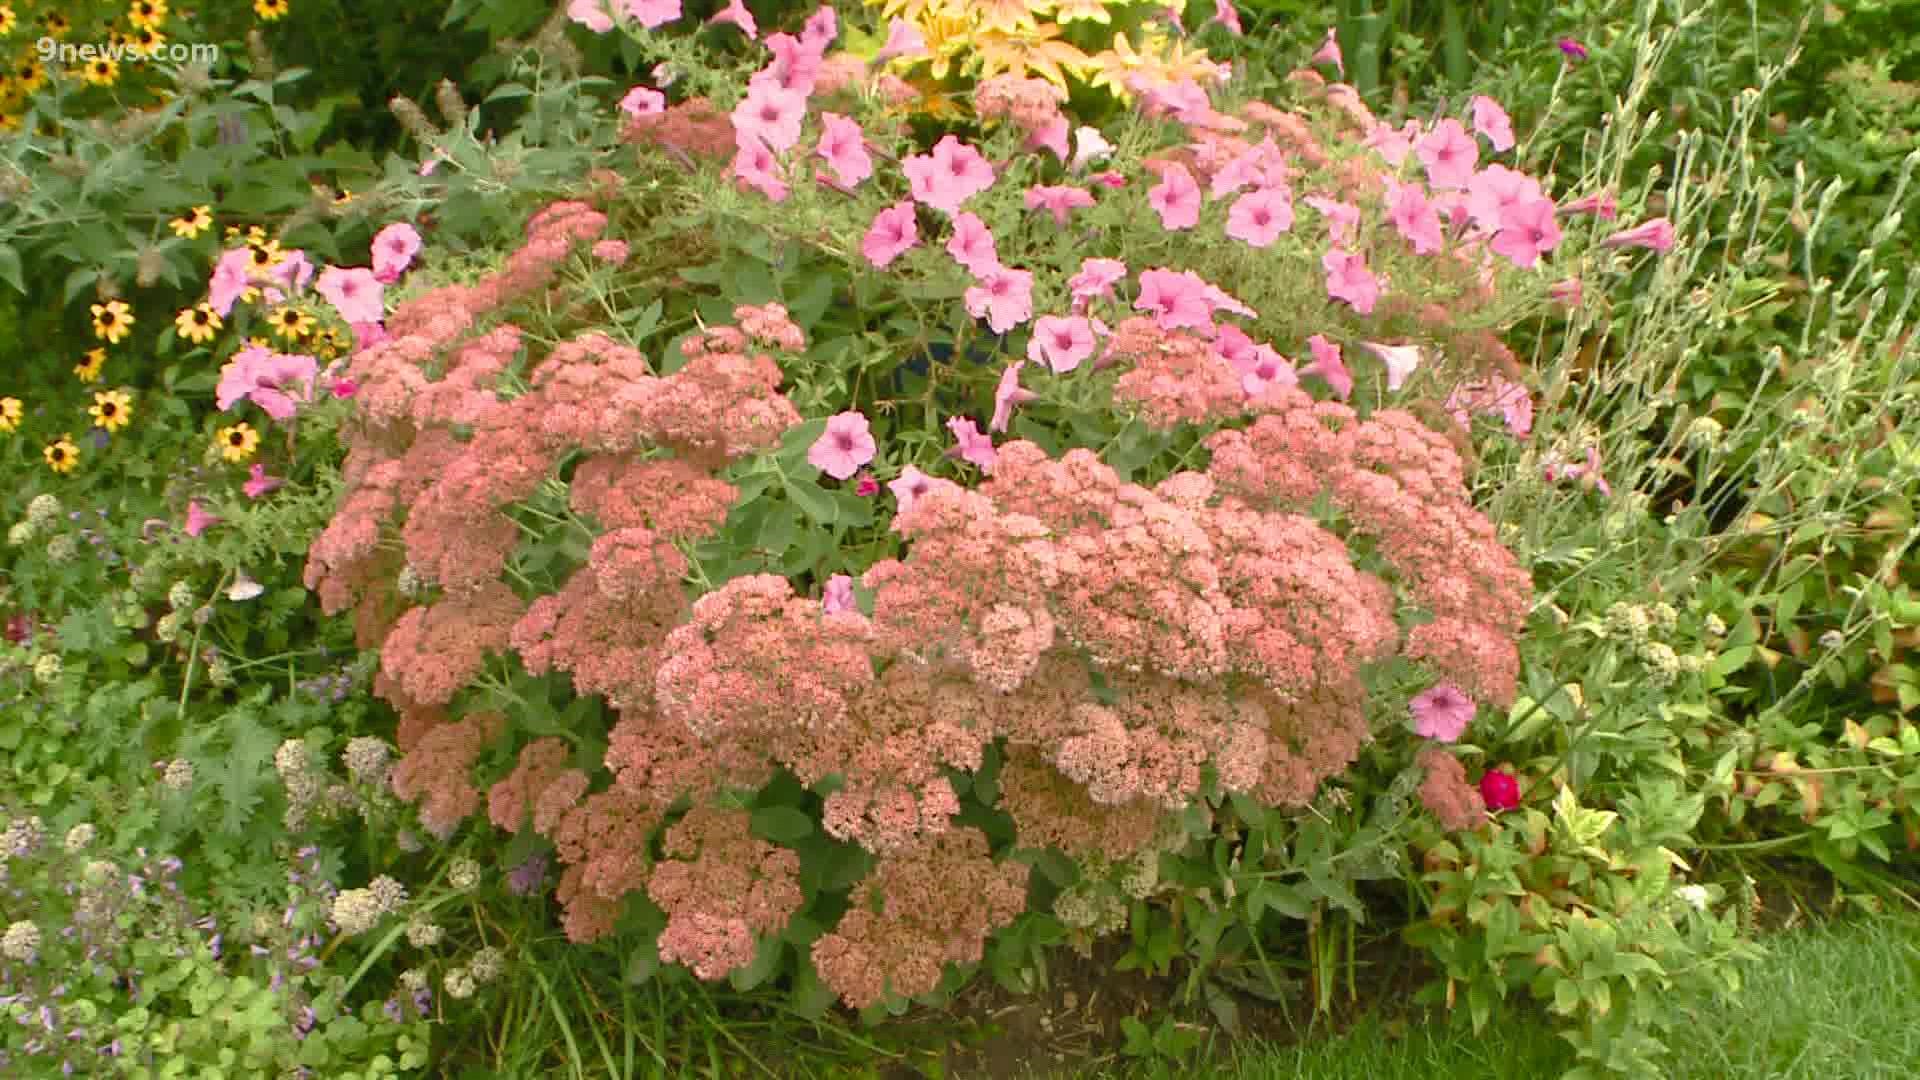 Recommended plants include Sedum 'Autumn Joy,' Hollyhock 'Majorette,' montbretia, Japanese anemone, Aster 'Dream of Beauty,' and Rudbeckia hirta.